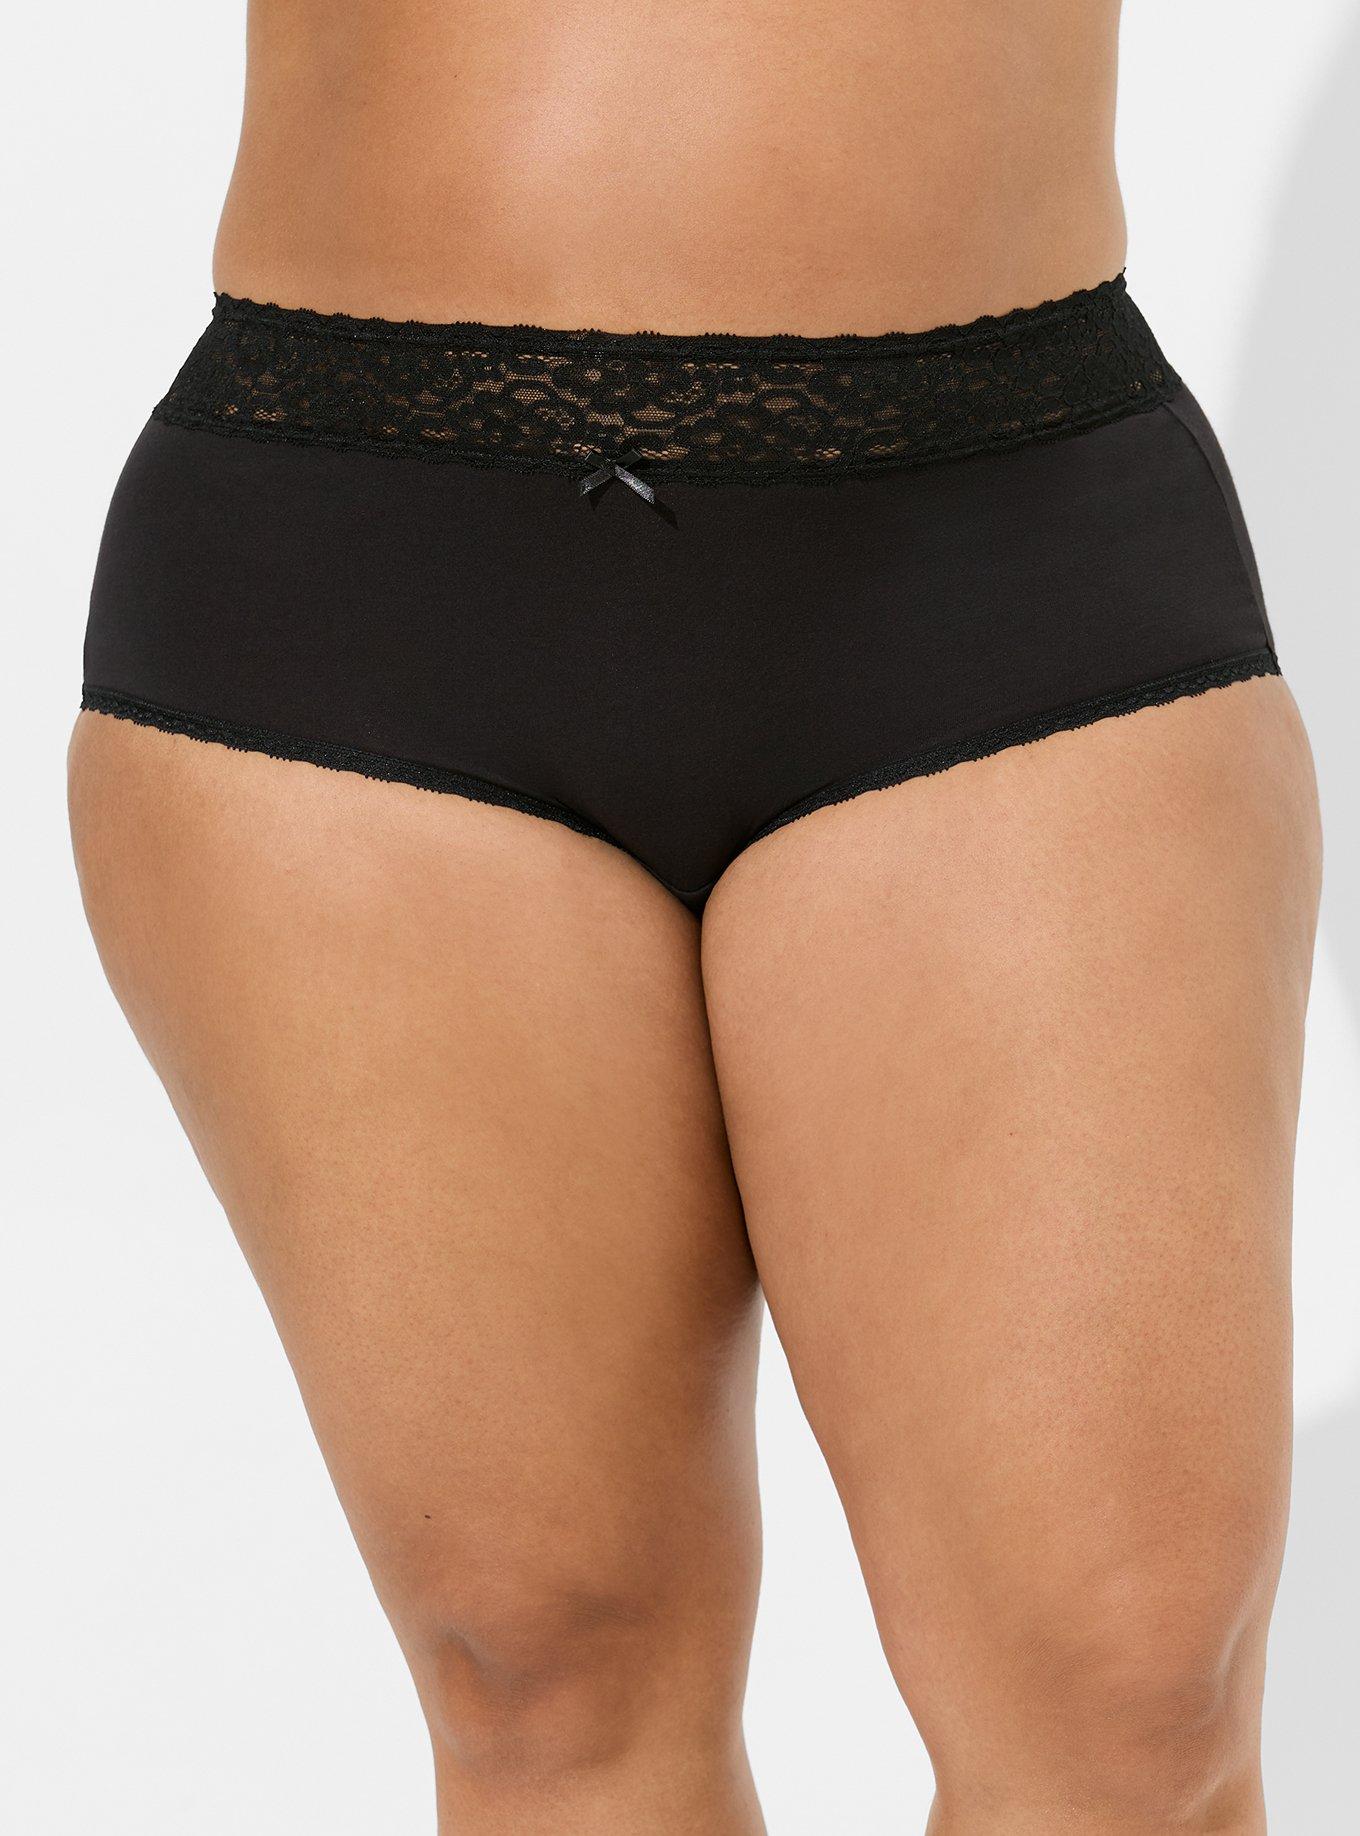 FEMULA Full Hipster Cotton Stretch Mid Waist Full Coverage Panties